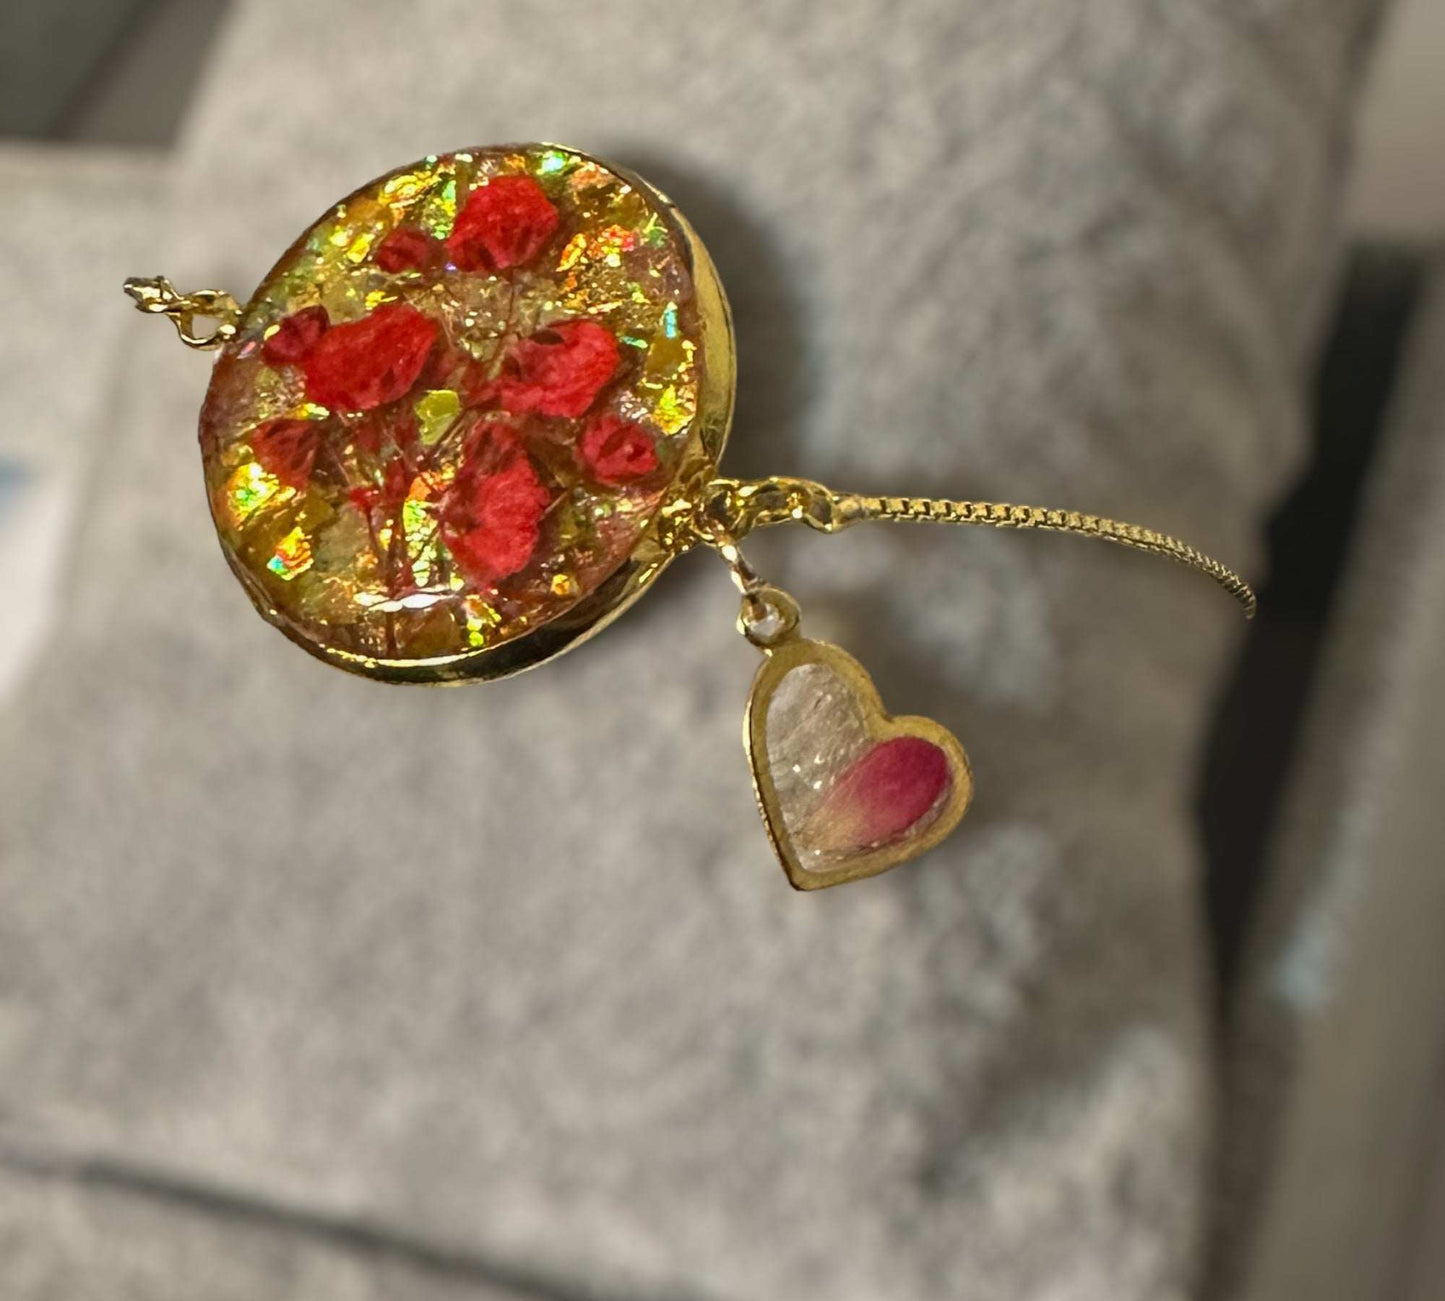 Gilded Blossoms Bracelet: Red Floral and Heart Charm Gold Slider Chain